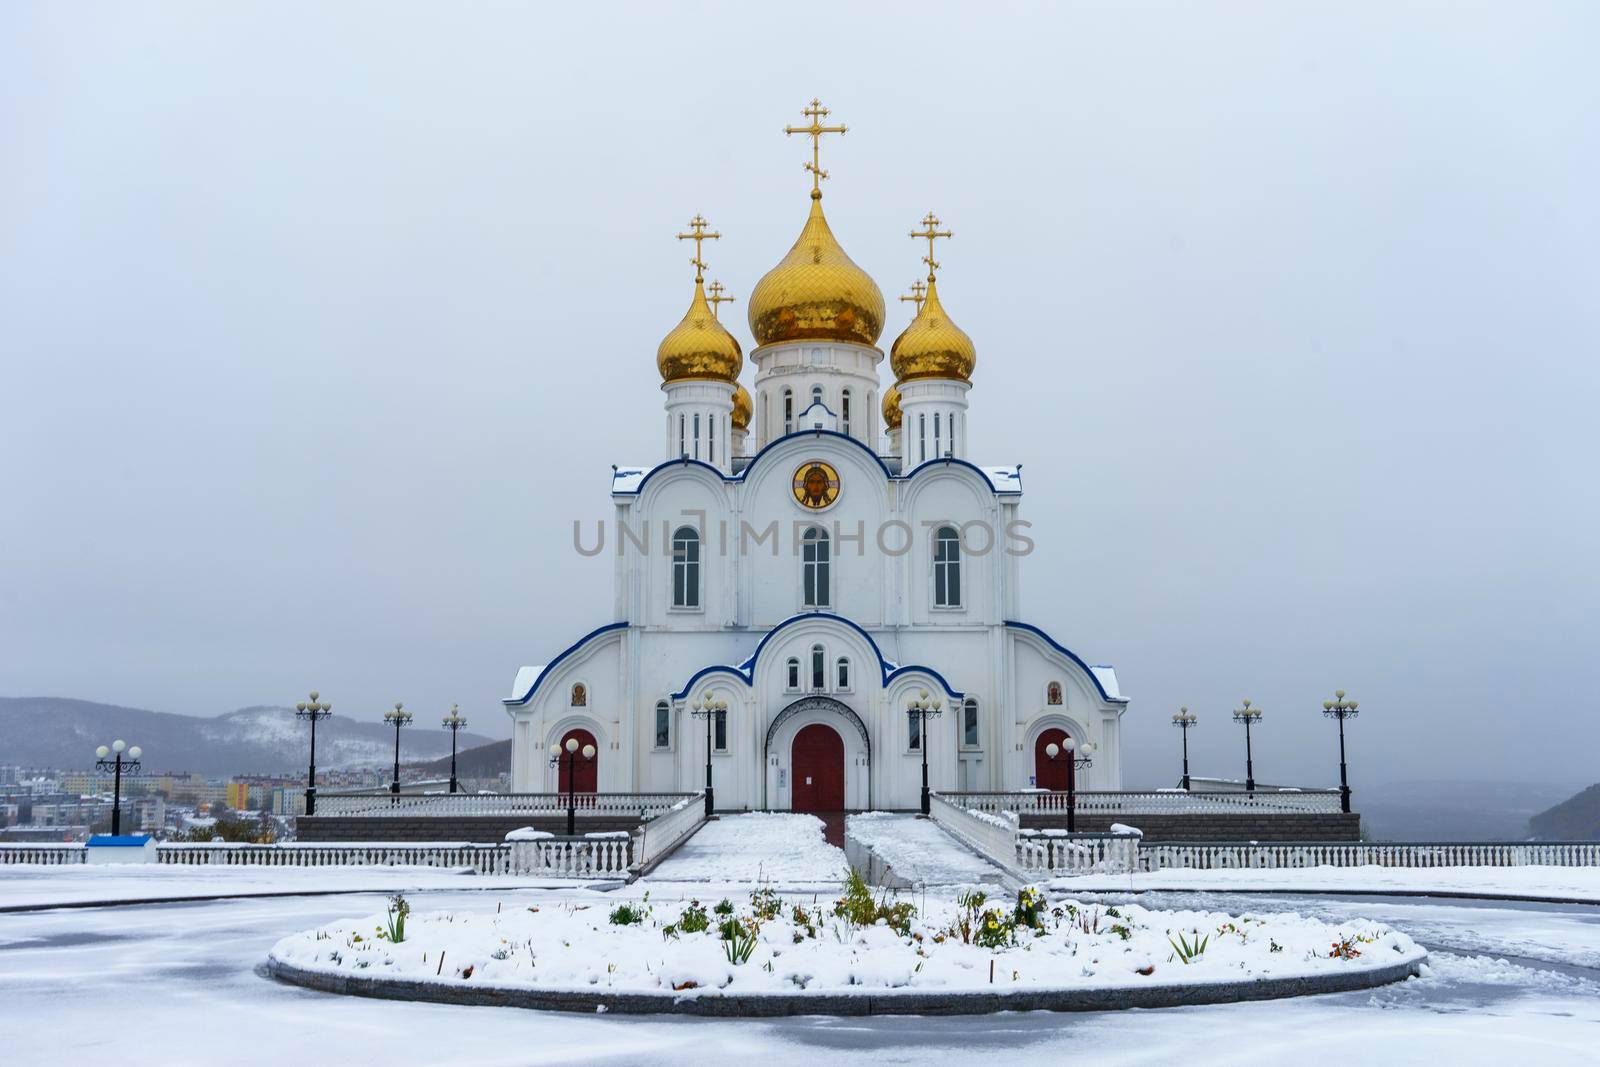 Russian Orthodox Cathedral - Petropavlovsk-Kamchatsky, Russia by Vvicca